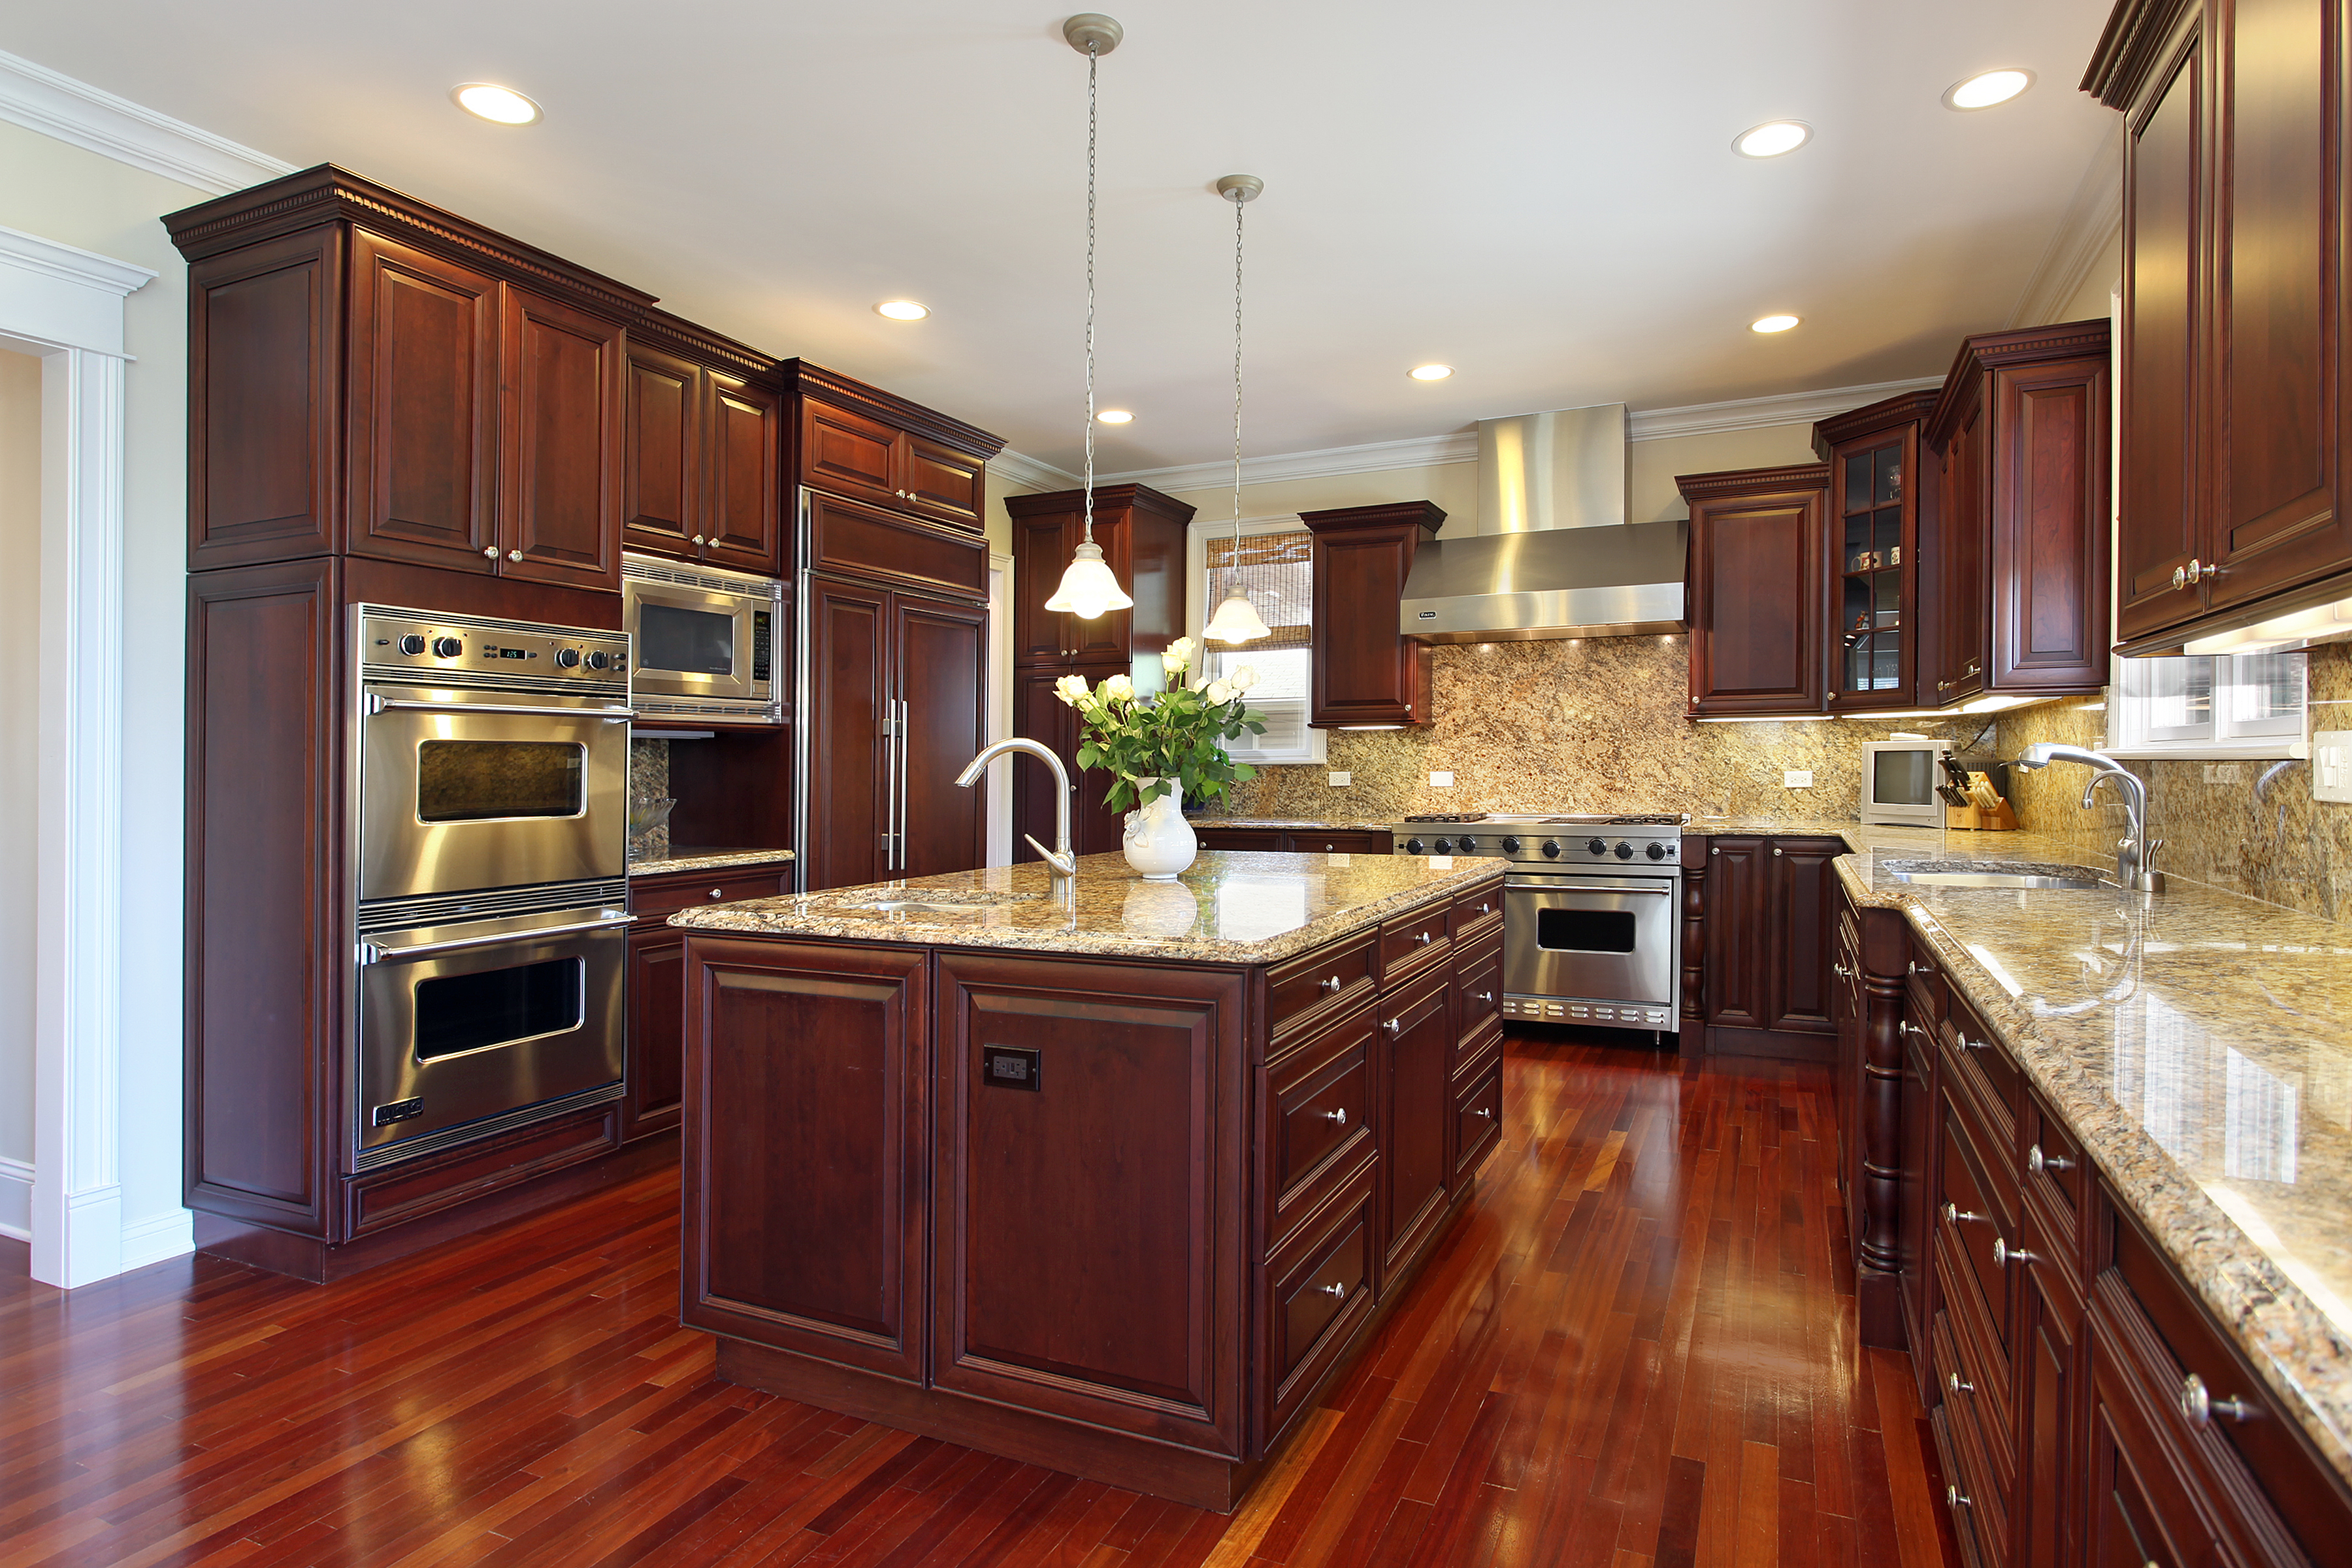 A large, traditional kitchen with dark stained cabinets.